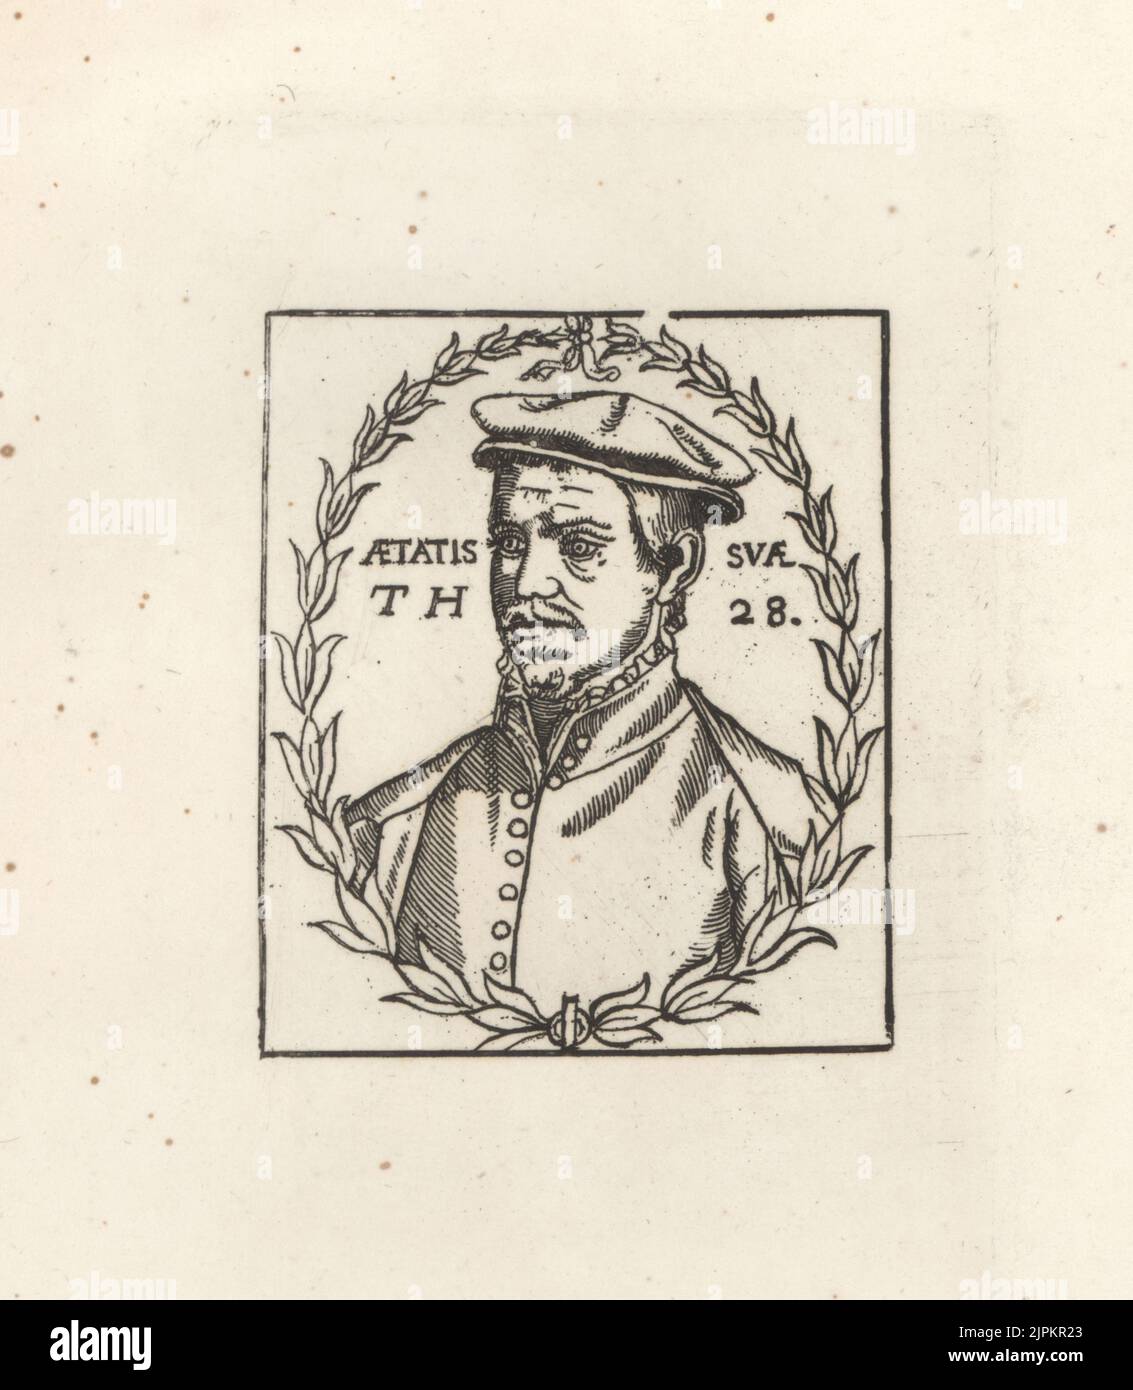 Thomas Hill, English writer, astrologer, gardener and translator, aka Didymus Mountain, c.1528-1574. In cap, collar and doublet, within an oval wreath. Aetatis Svae TH 28. From a rare woodcut. Copperplate engraving from Samuel Woodburn’s Gallery of Rare Portraits Consisting of Original Plates, George Jones, 102 St Martin’s Lane, London, 1816. Stock Photo